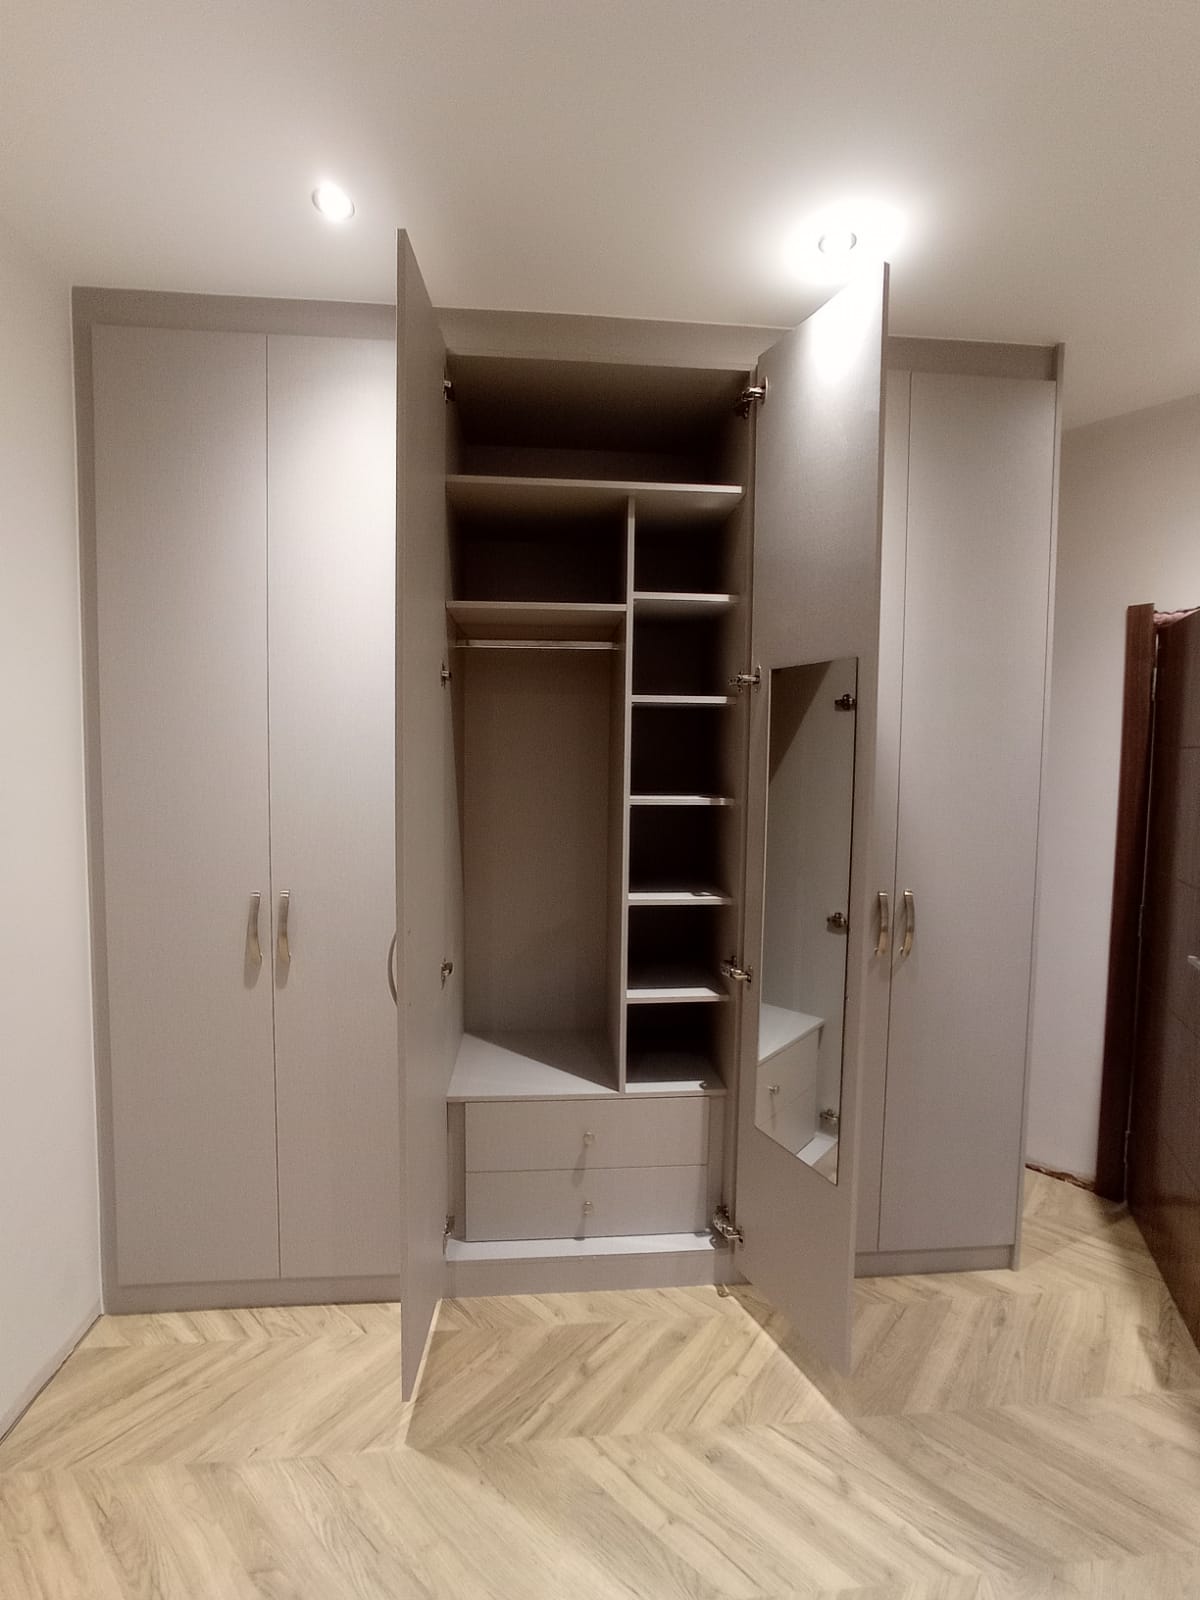 Pinner fitted wardrobes